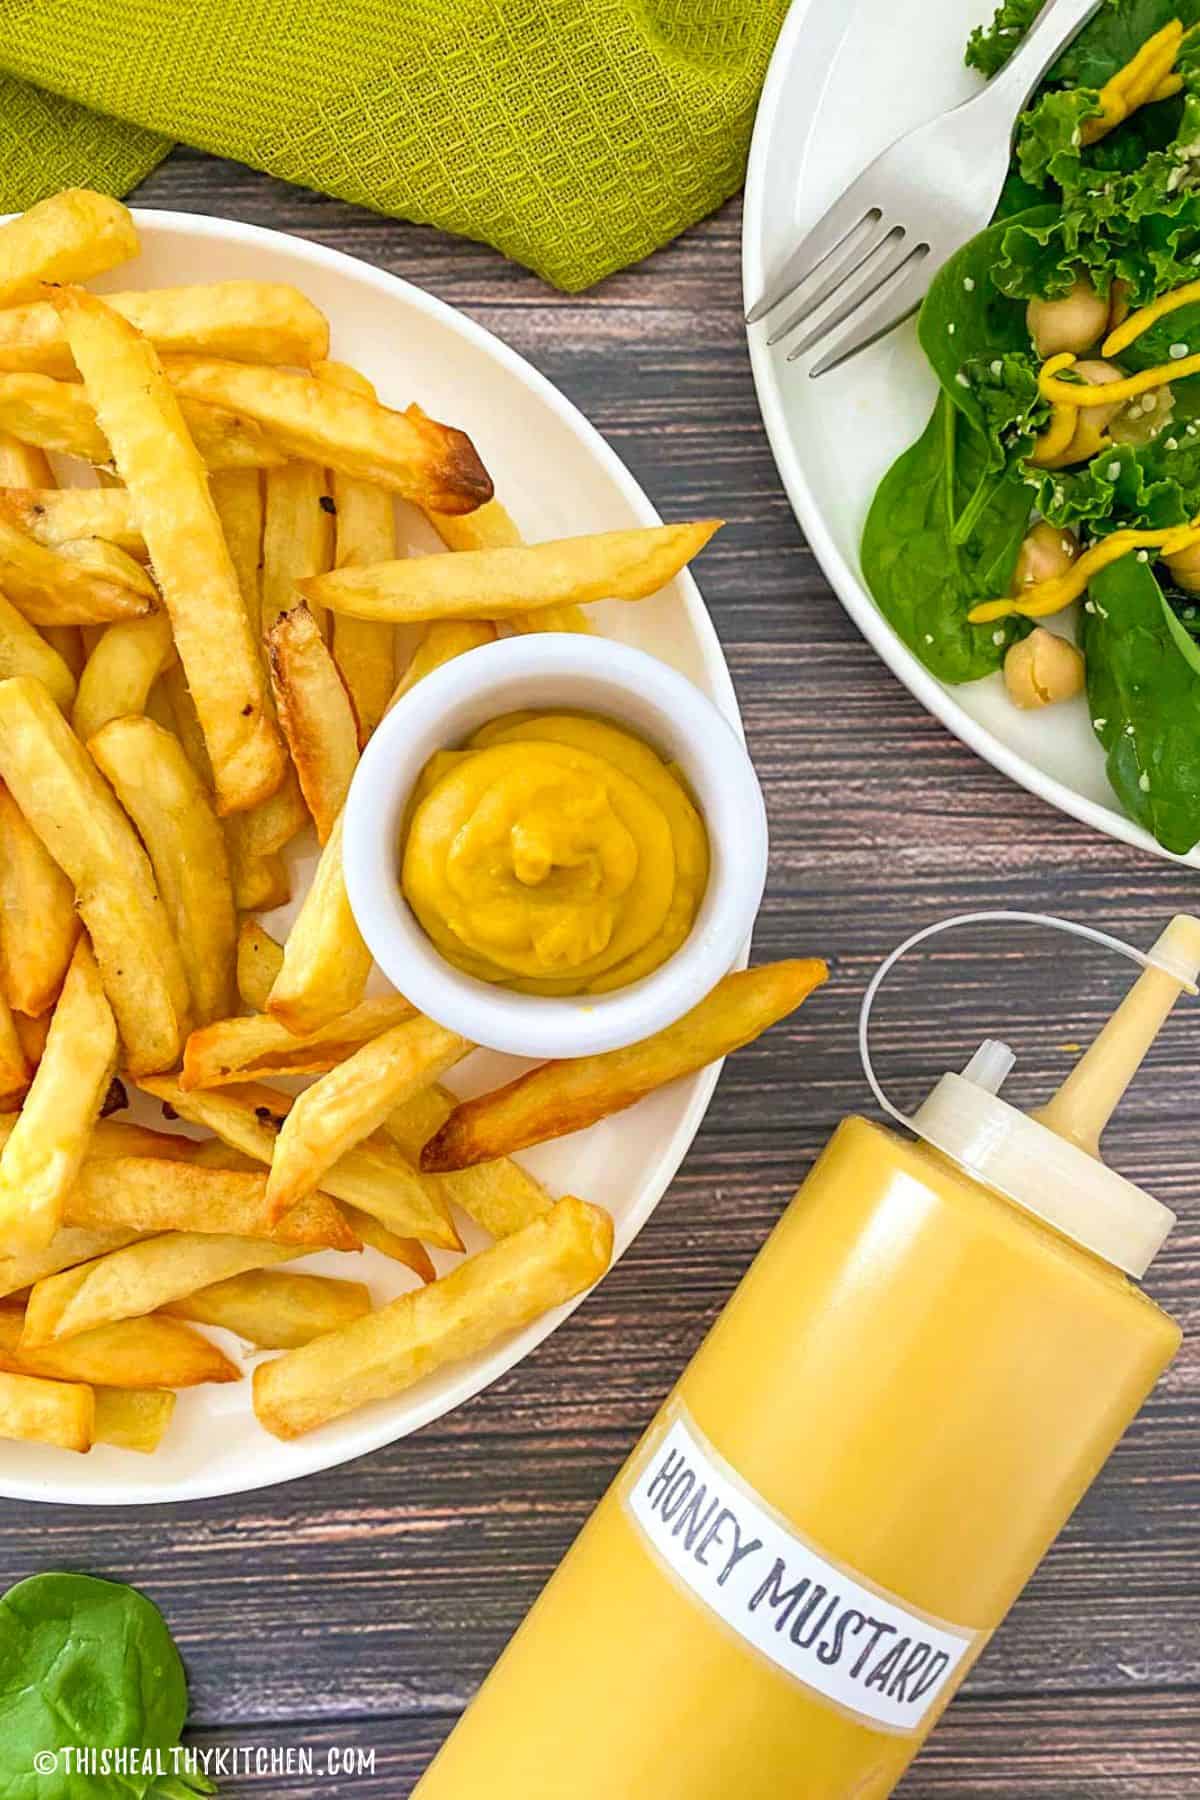 Plate of french fries with dipping bowl of vegan honey mustard.